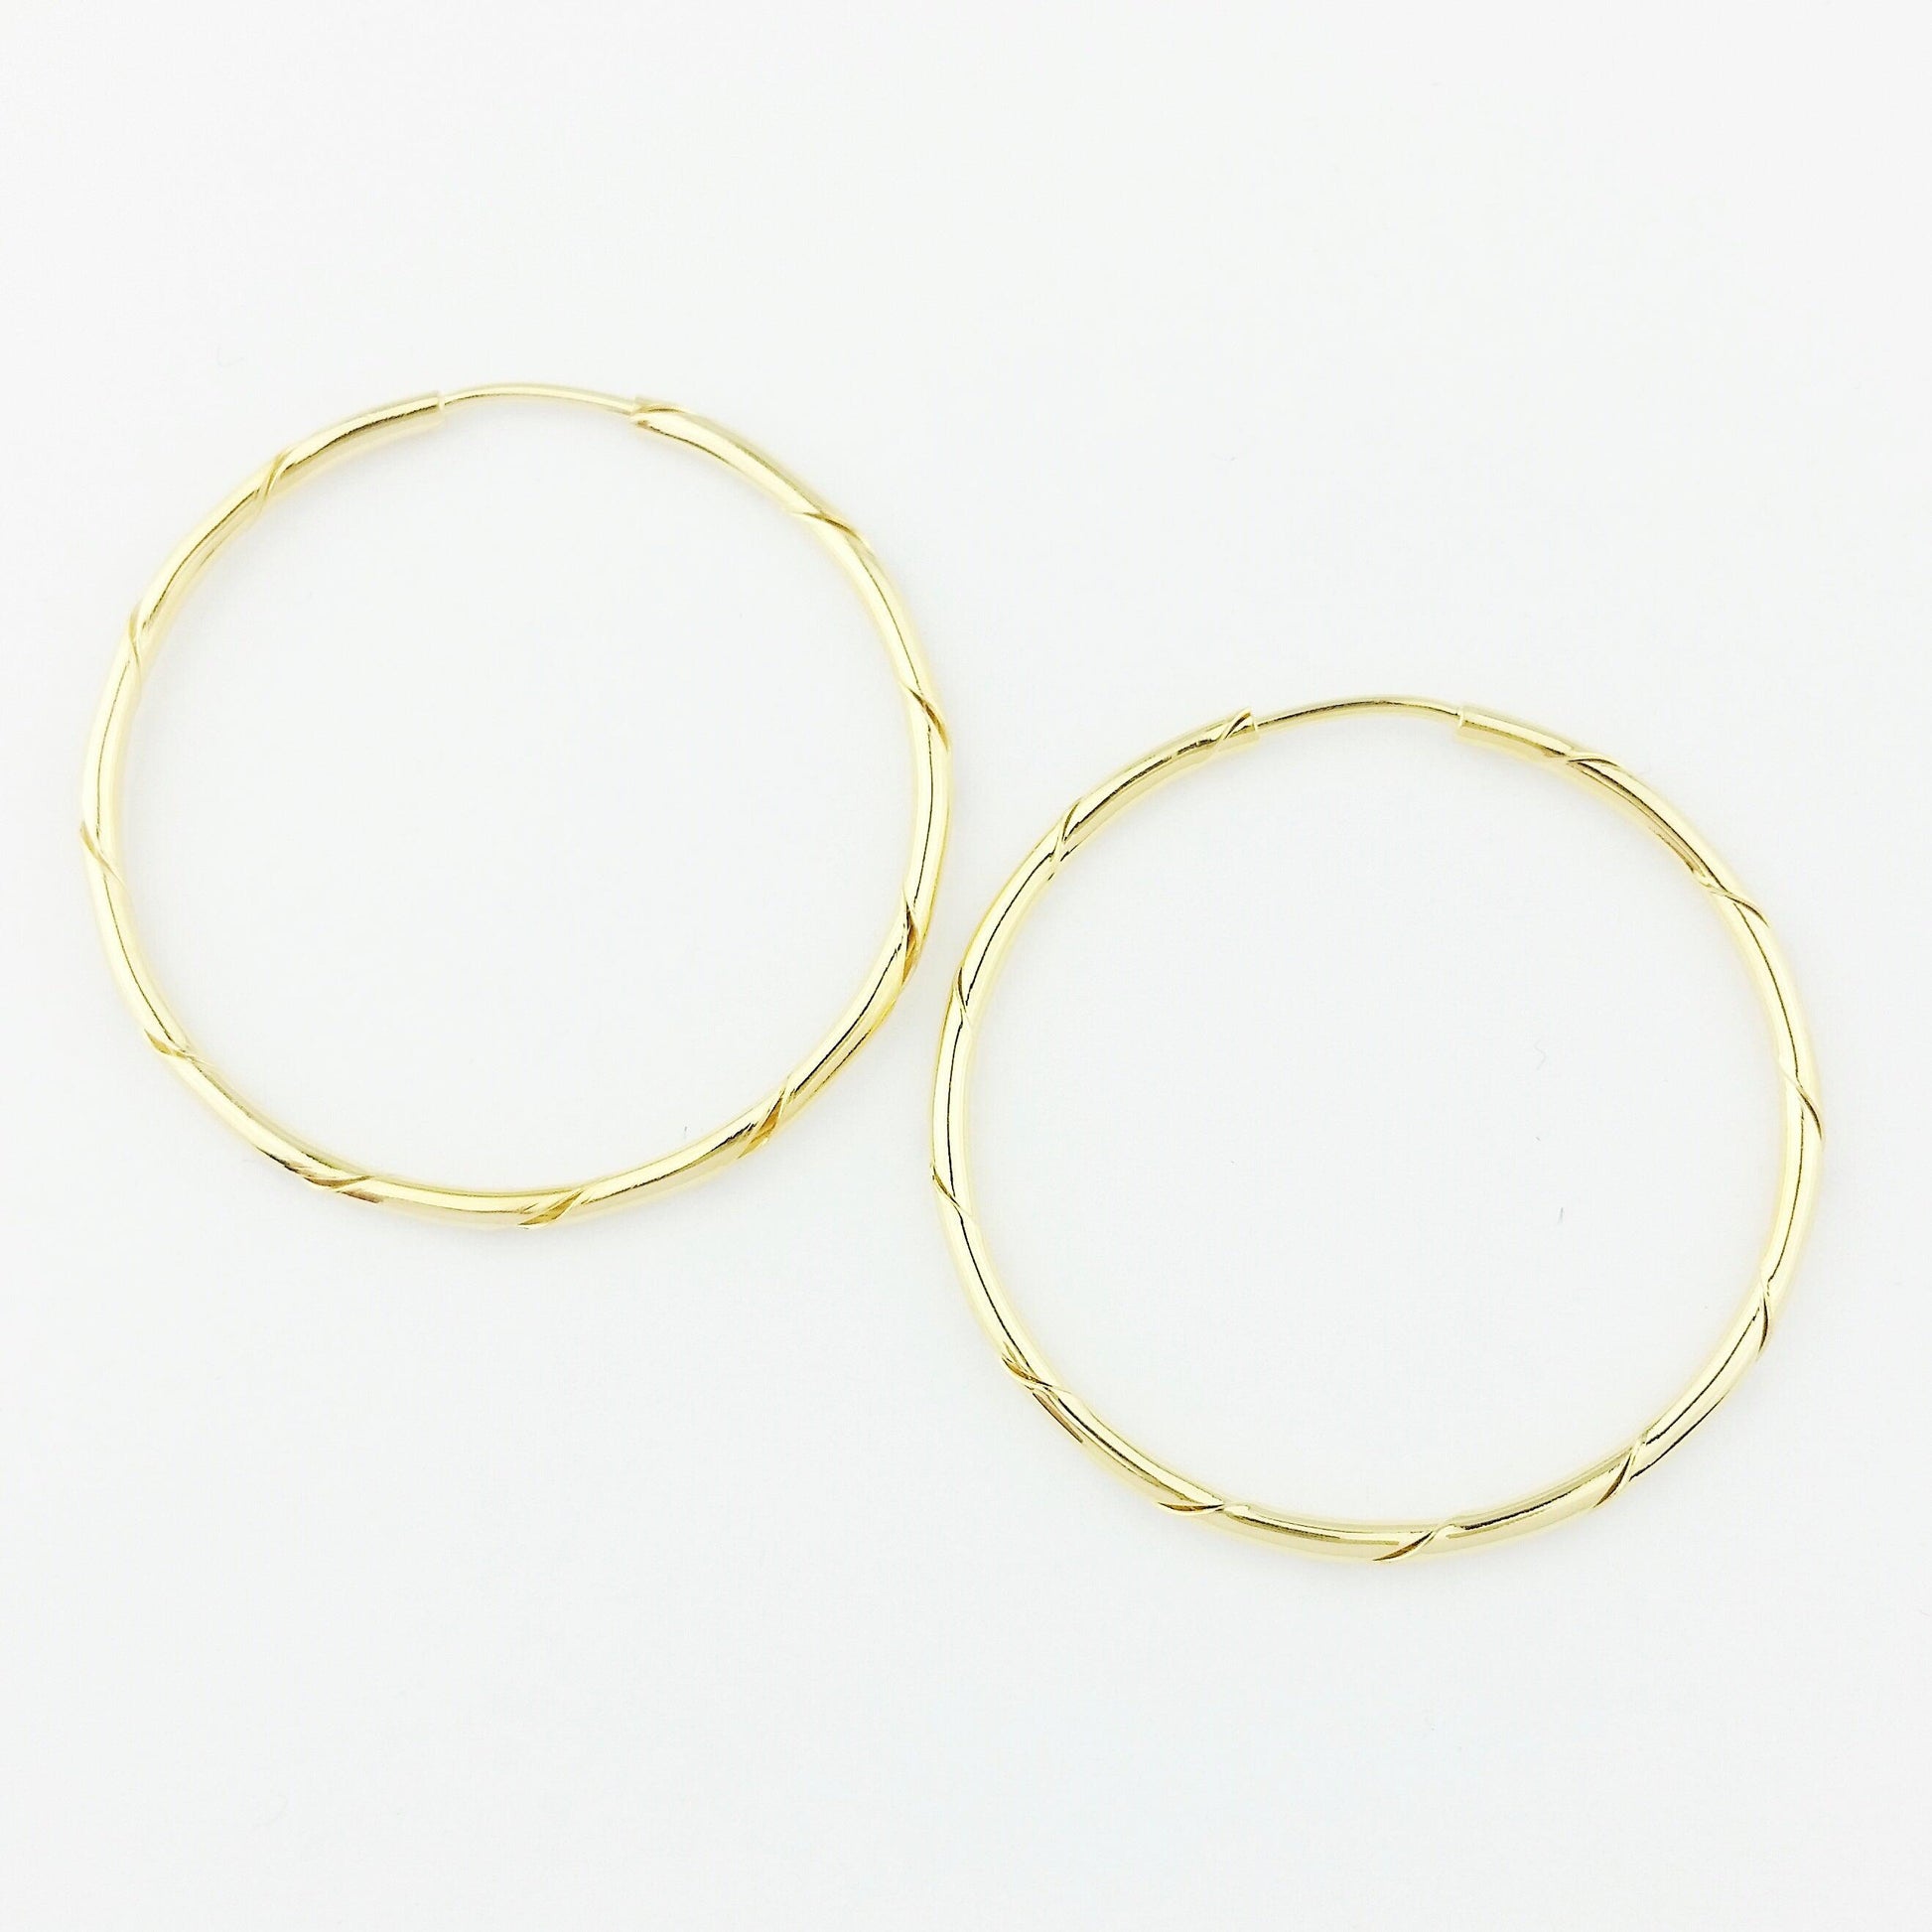 GoldFi 18k Gold Filled Continuous Twisted Tube Hoop Earrings Endless Style